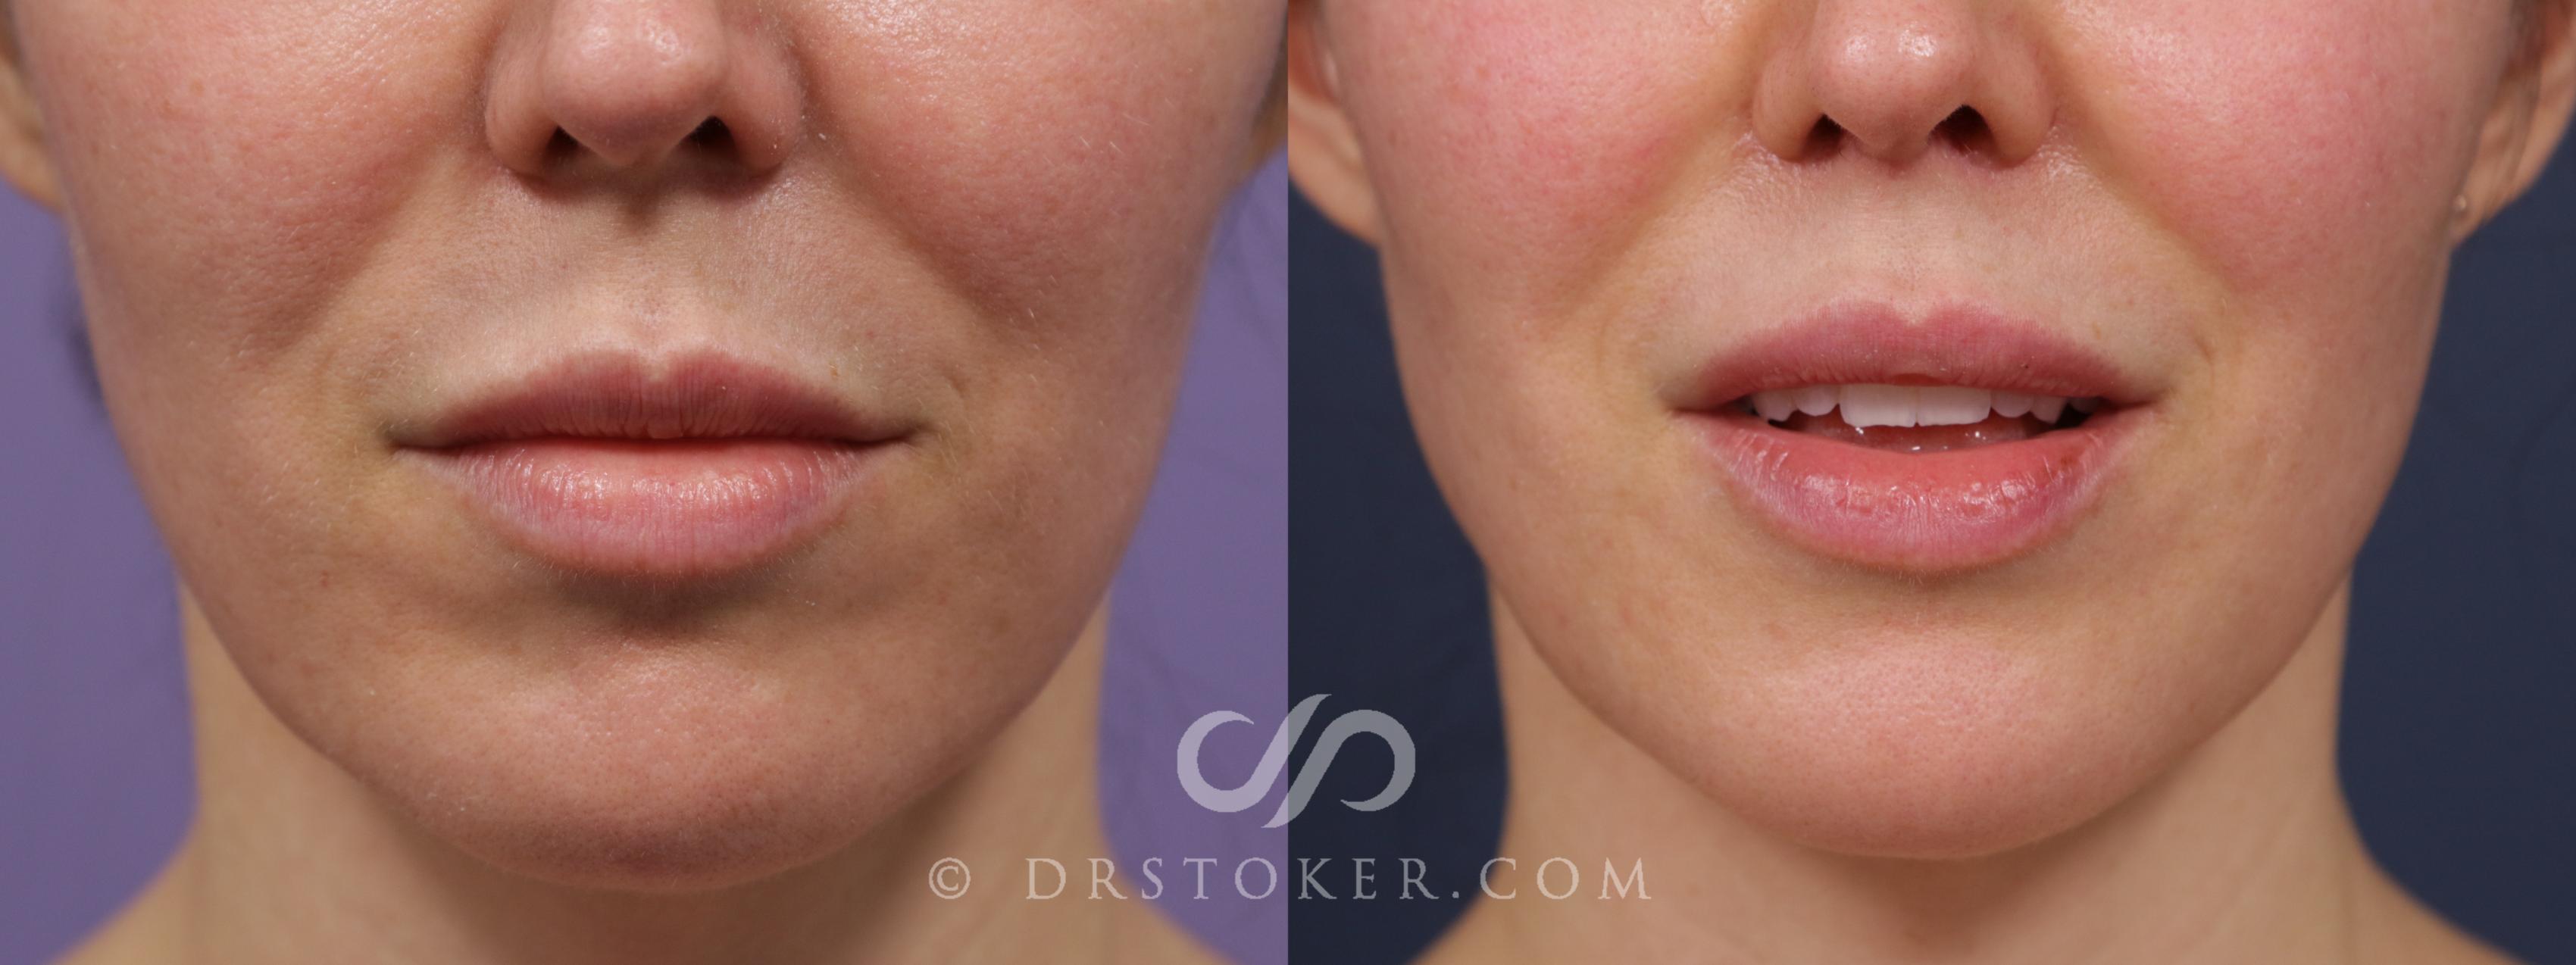 Before & After Lip Lift Case 1997 Front View in Marina del Rey, CA